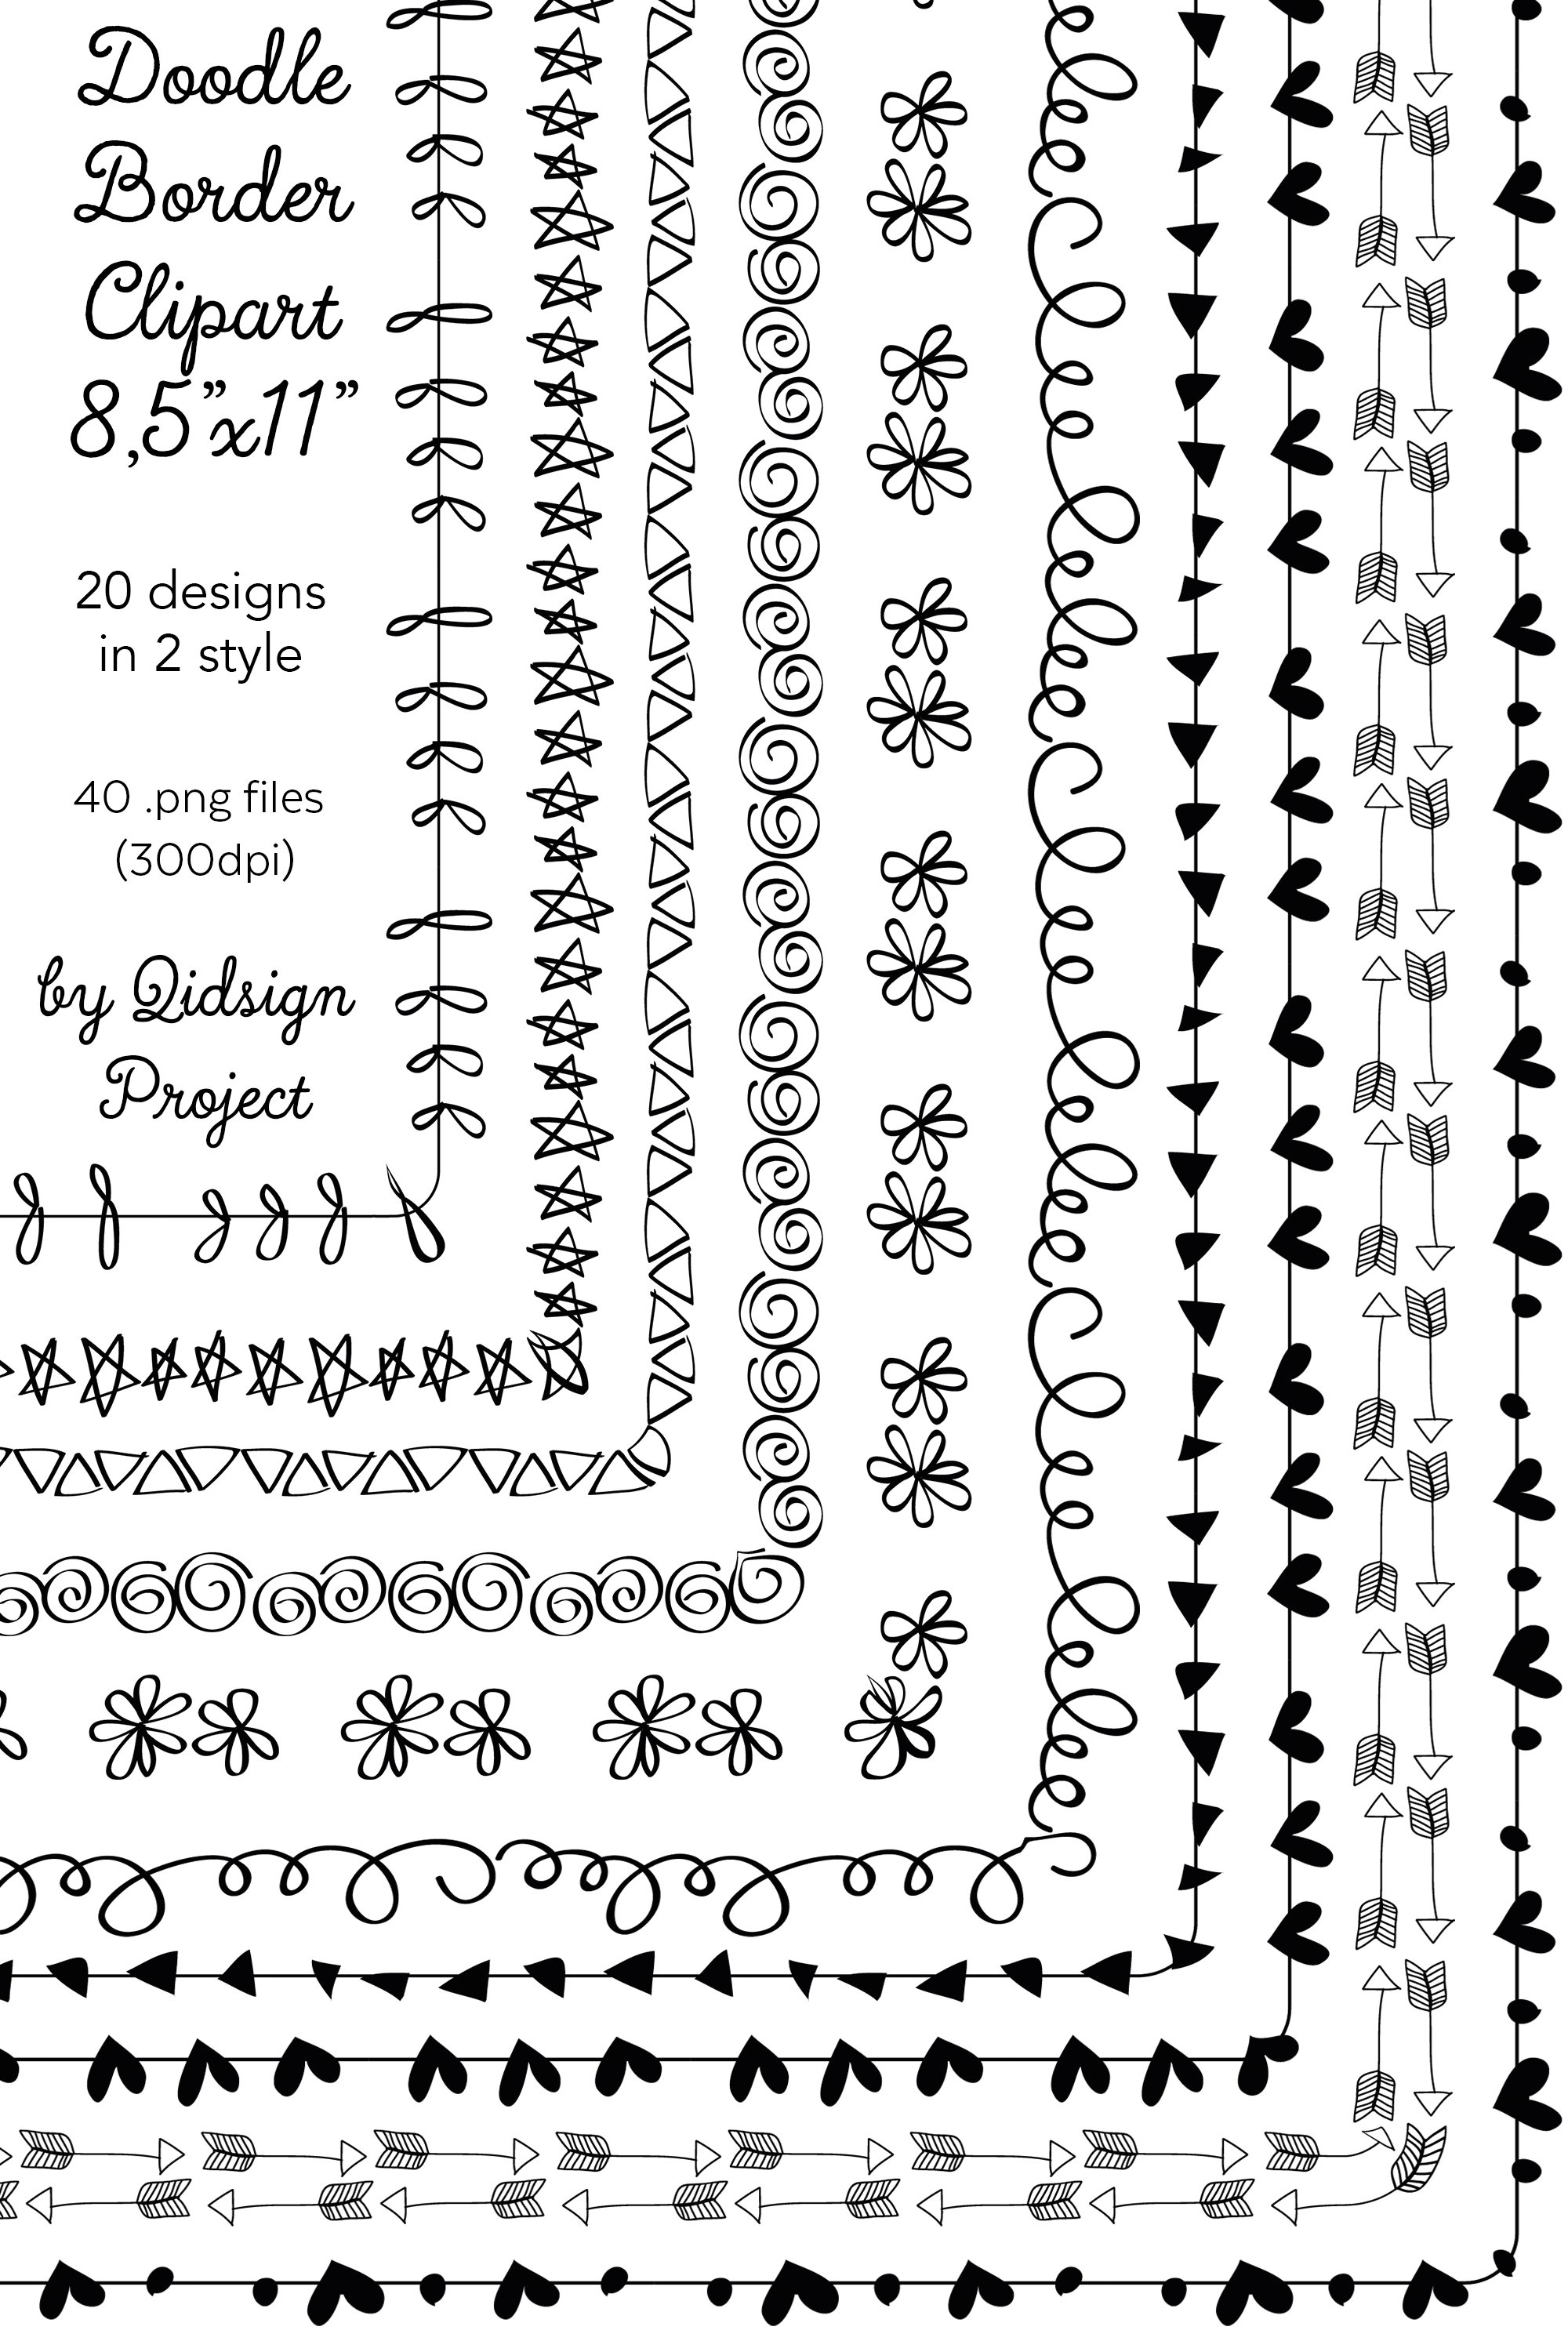 School stationery items on sheet with a blank sheet in the middle,Doodle  line drawing vector illustration.Template for advertising brochure.School  items for study and creativity set,black liner sketch 13178034 Vector Art  at Vecteezy